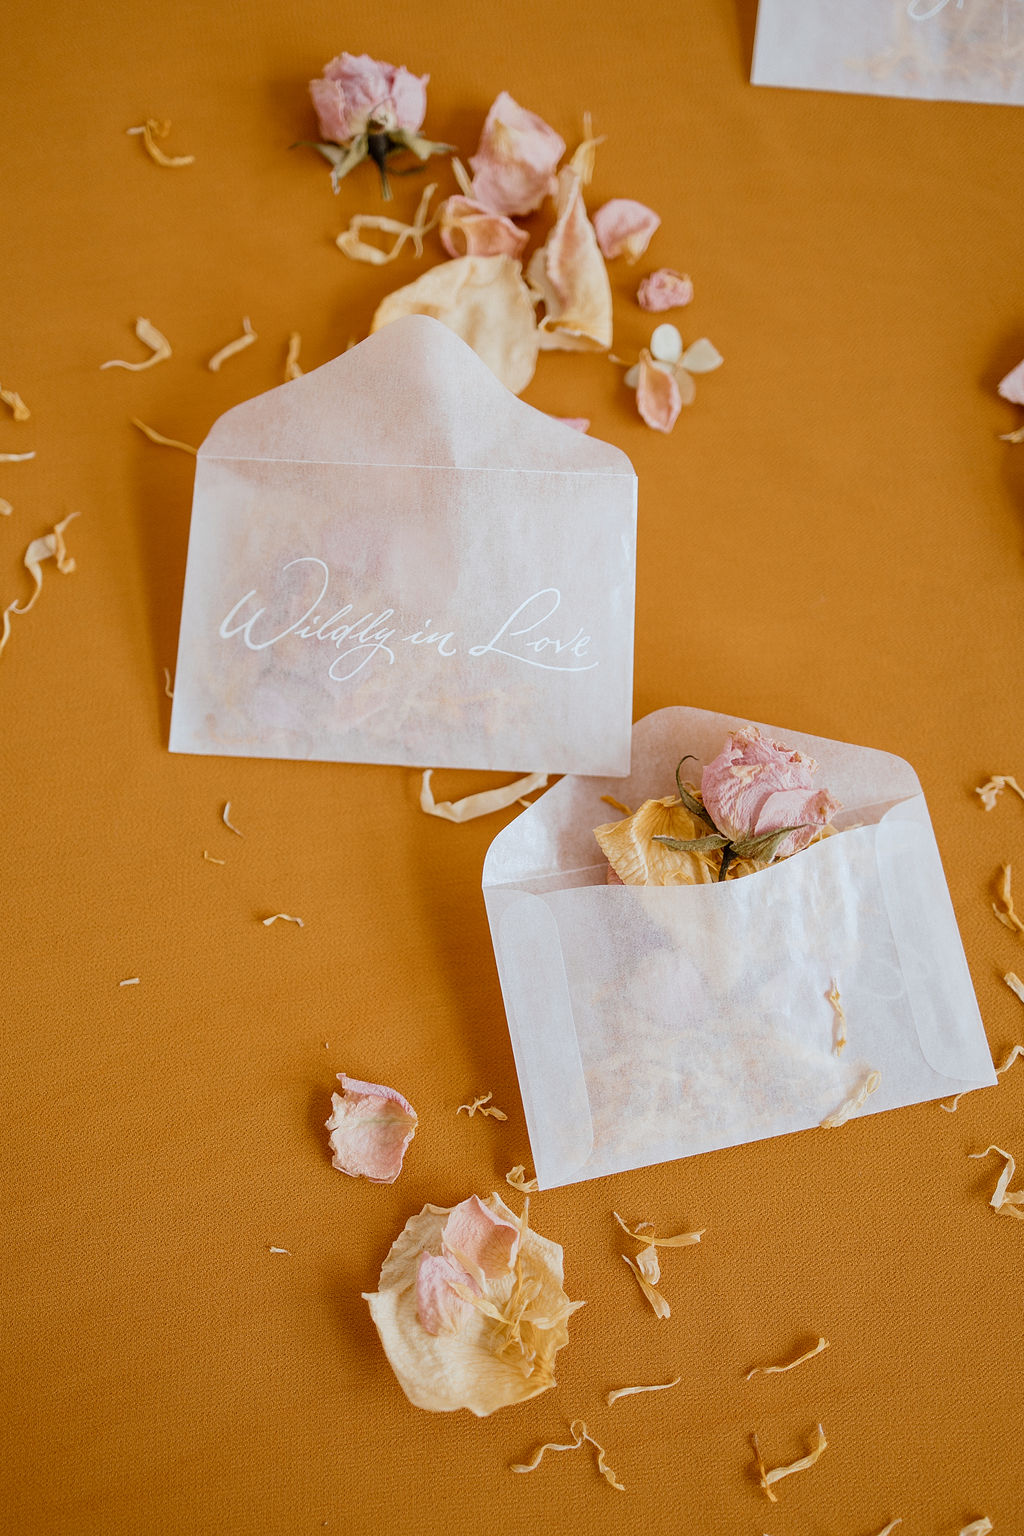 Sachets of dried rose petals for your wedding day